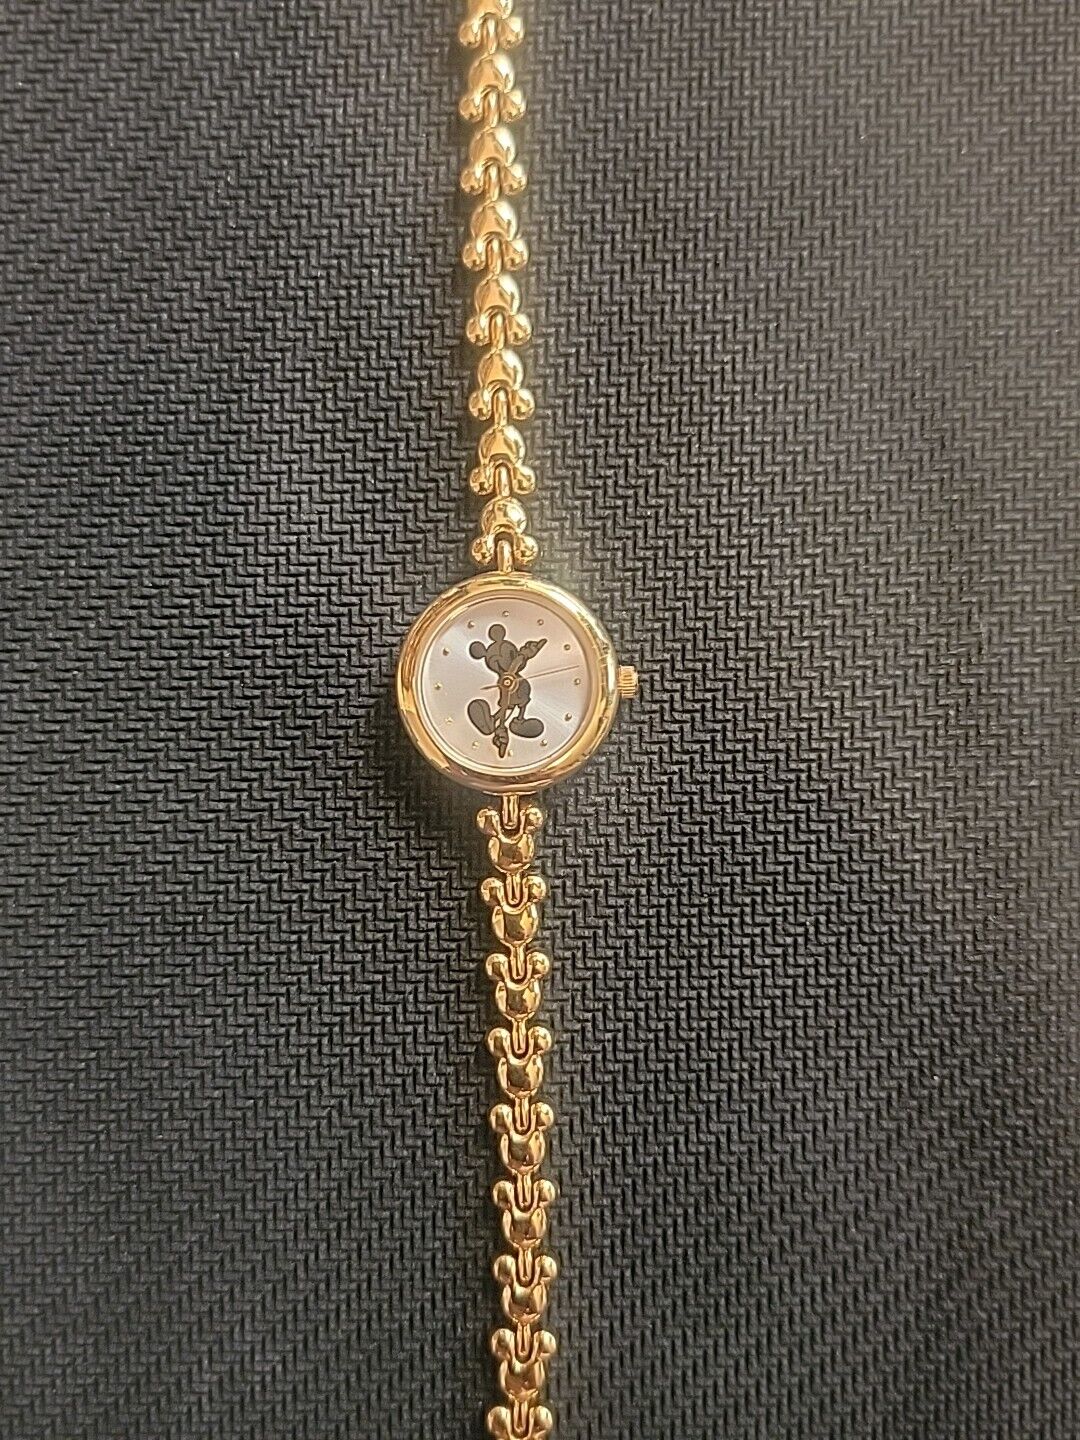 Ladies Vintage Mickey Mouse Time Works Gold Tone Watch.